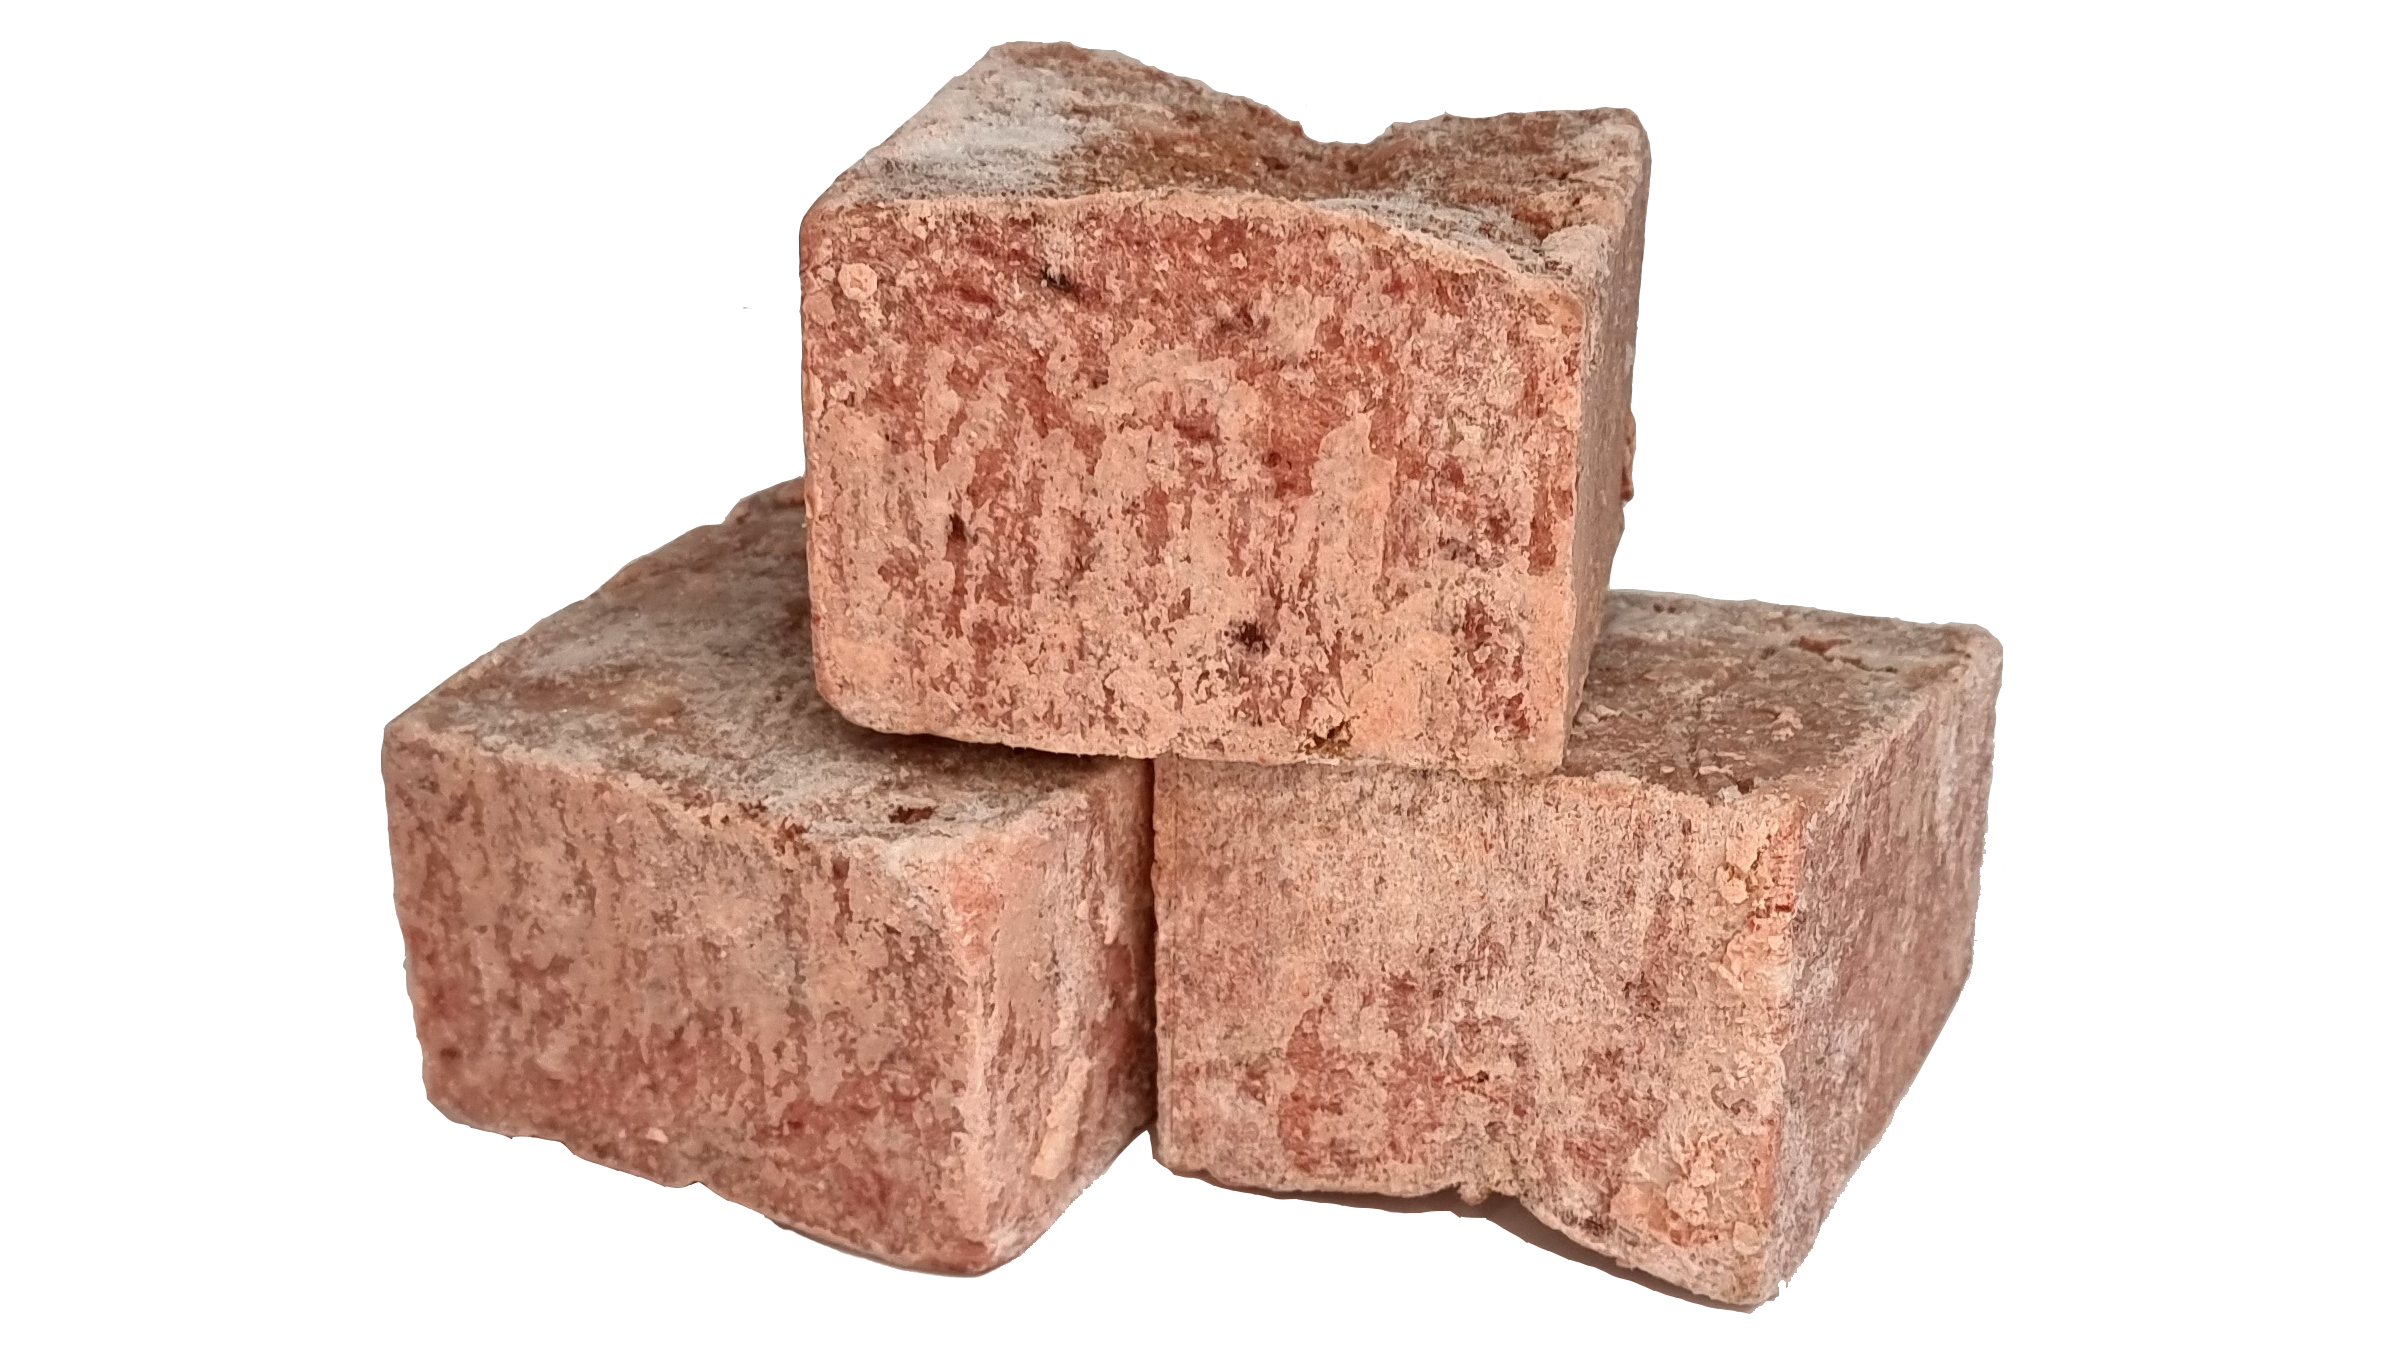 Turkey, Bone and Offal COMPLETE 10kgs (22lb)   24 x Small Blocks - Working Dog